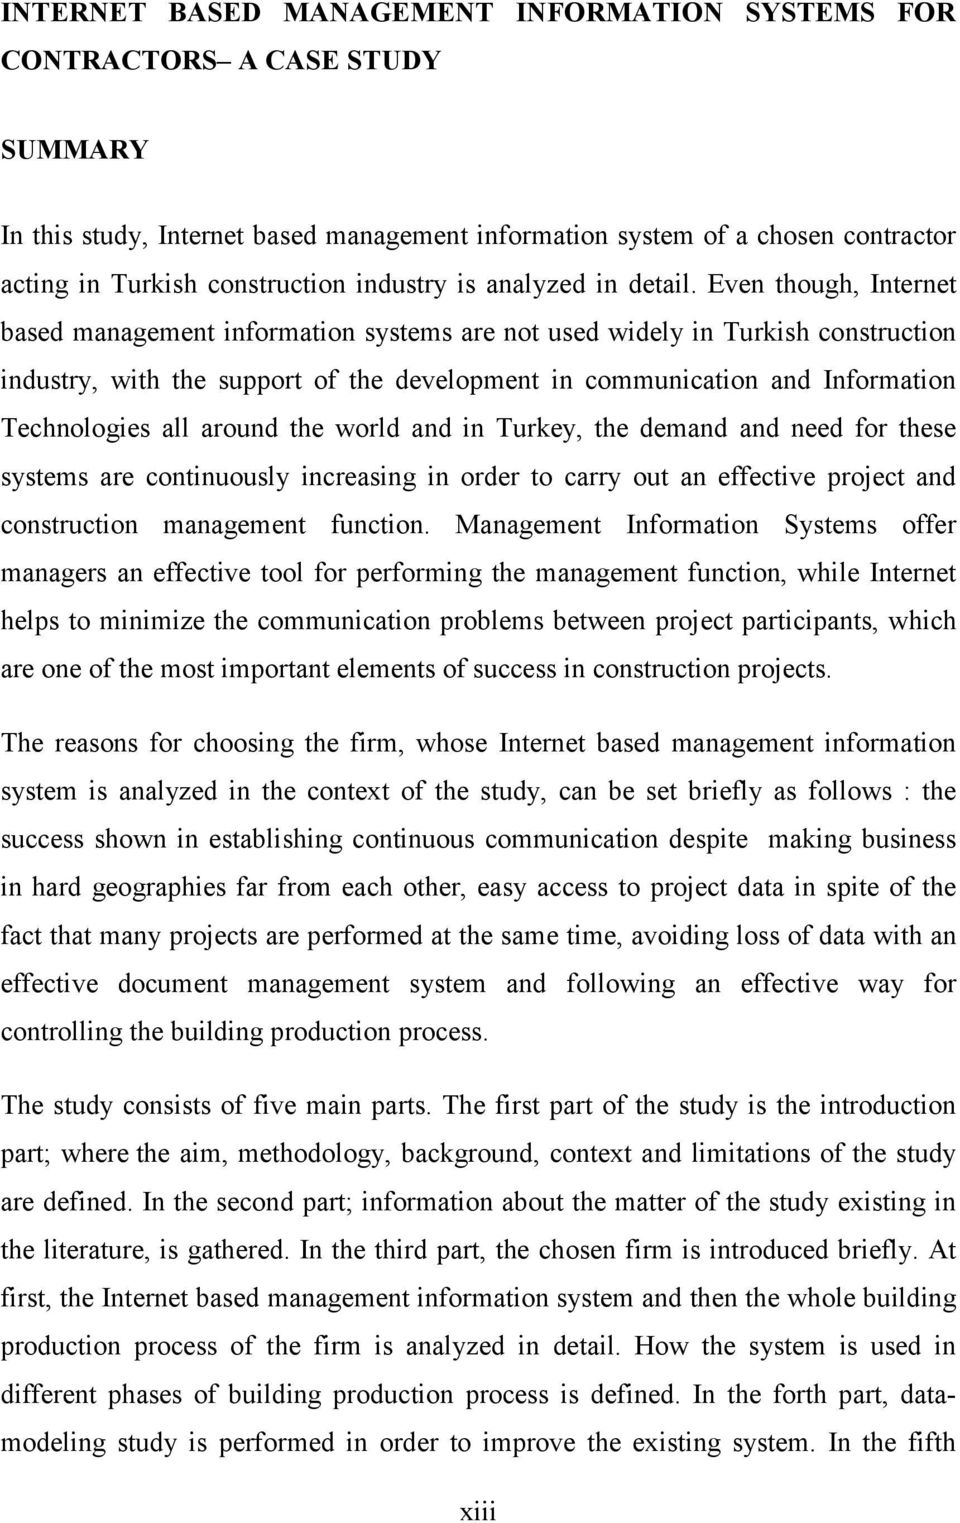 Even though, Internet based management information systems are not used widely in Turkish construction industry, with the support of the development in communication and Information Technologies all